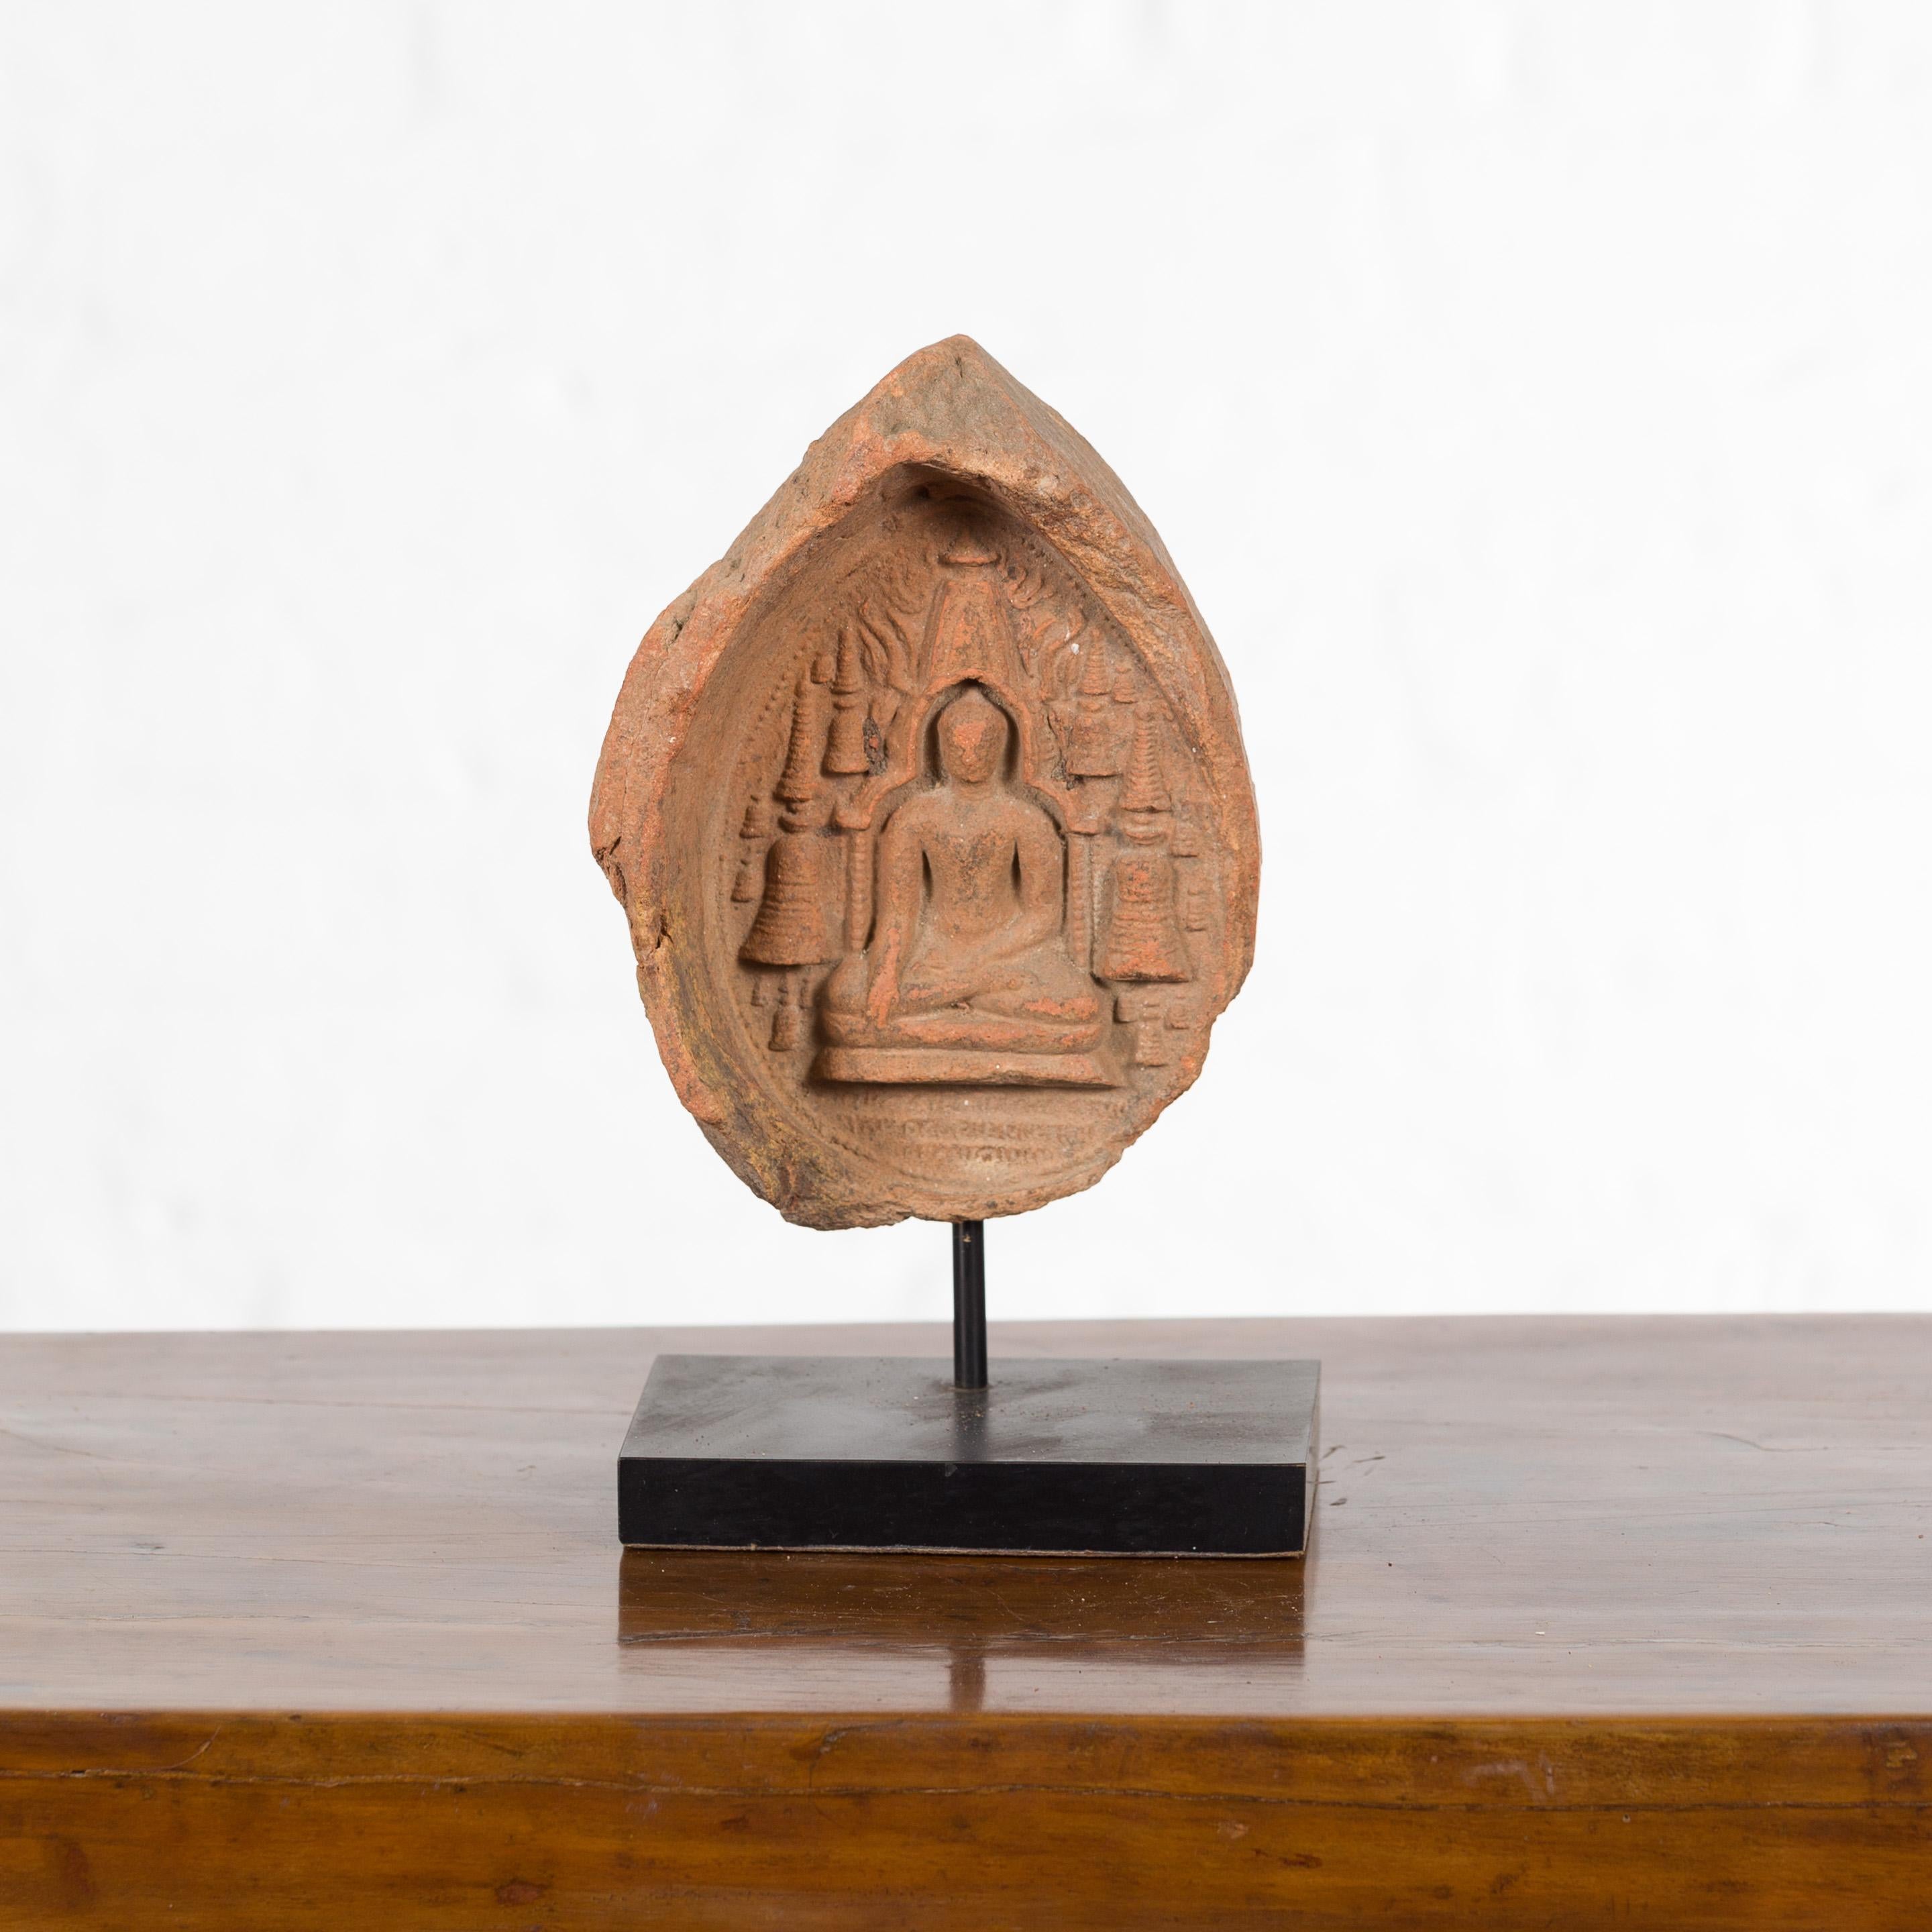 A Burmese Pagan Empire terracotta votive Buddha sculpture from the 12th or 13th century, mounted on a custom stand. Created in Burma during the Pagan Kingdom, this votive terracotta bas-relief depicts the Buddha calling the Earth to Witness, holding